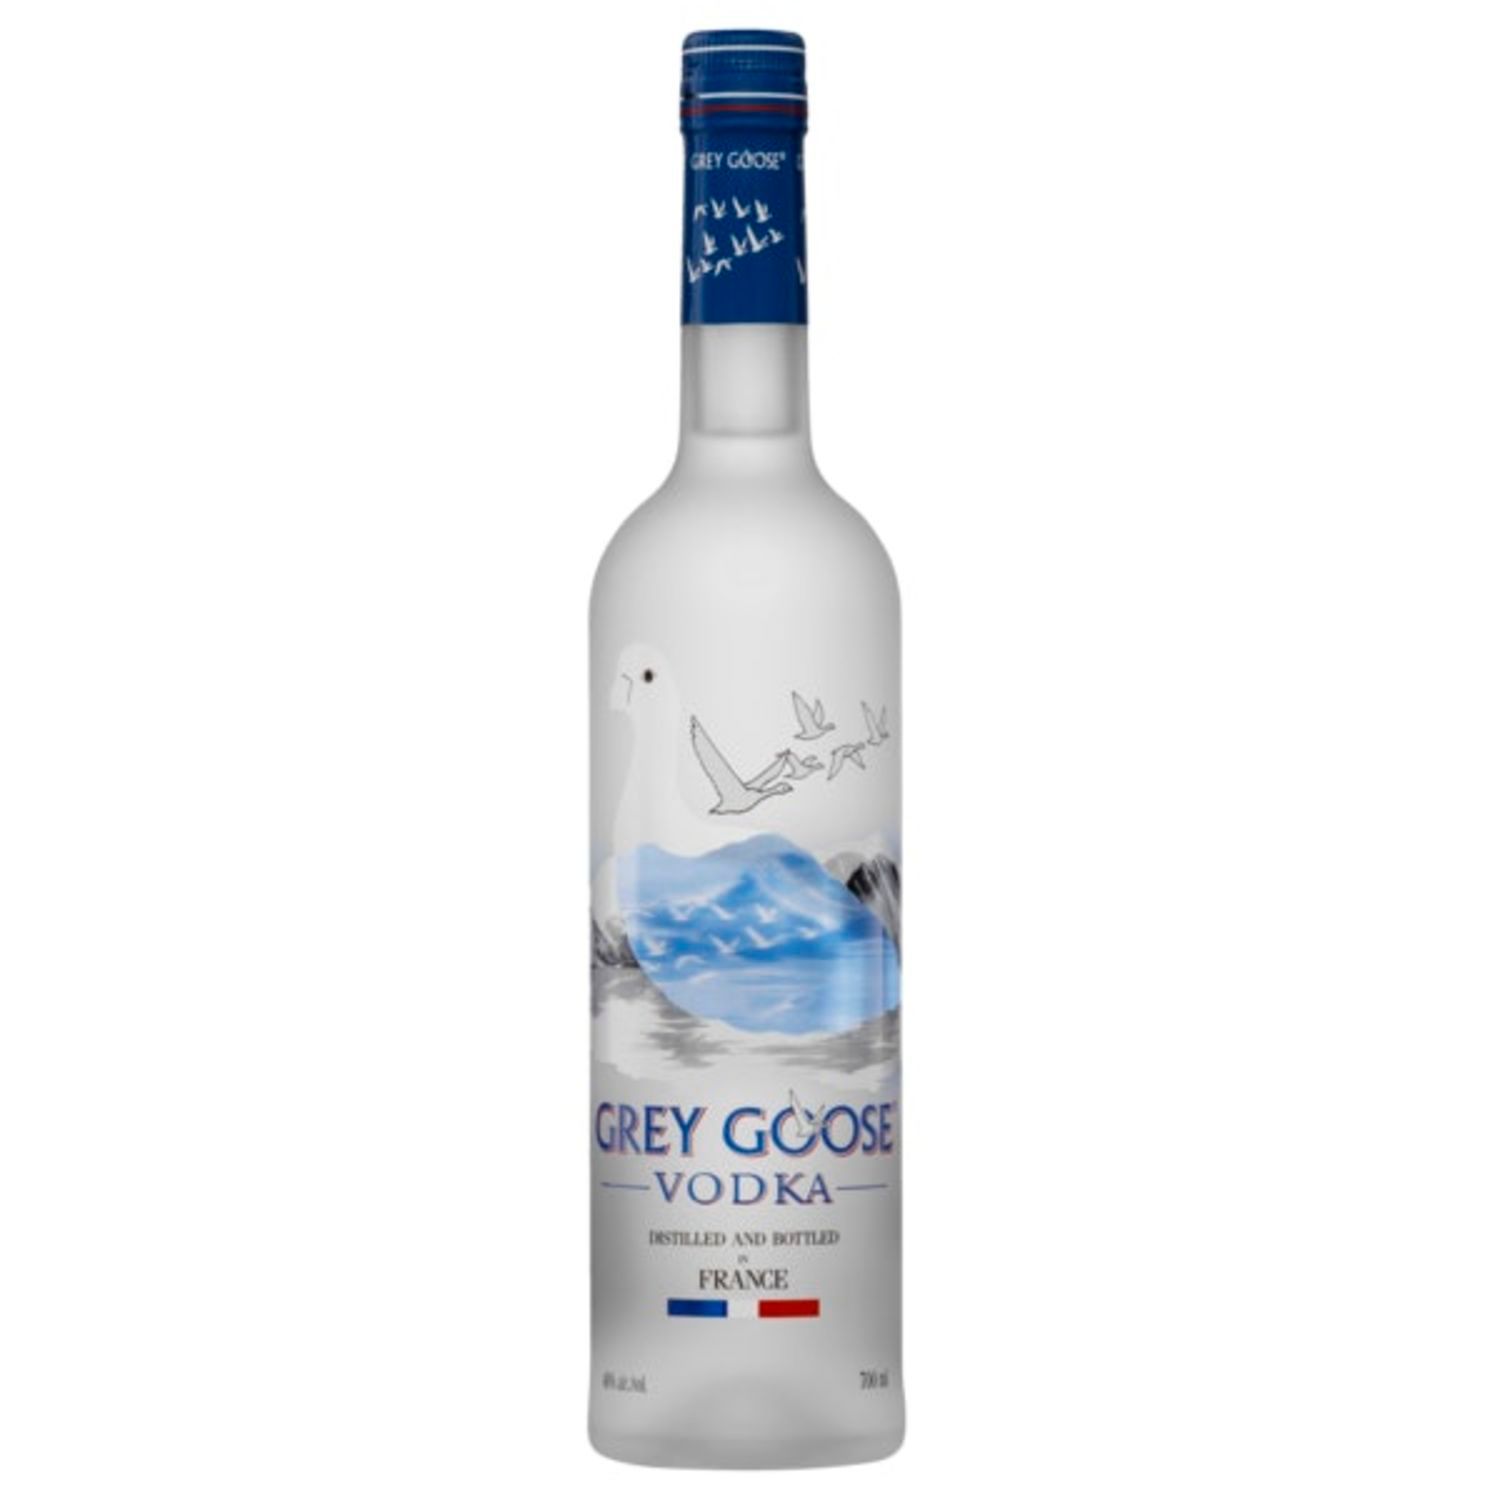 Grey Goose, the 'World's Best Tasting Vodka', as awarded by the Beverage Testing Institute is distilled using the finest French wheat from Picardy (the 'bread basket of France'), and blended with spring water from the Cognac region, making Grey Goose the ultimate premium vodka.<br /> <br />Alcohol Volume: 40.00%<br /><br />Pack Format: Bottle<br /><br />Standard Drinks: 22</br /><br />Pack Type: Bottle<br /><br />Country of Origin: France<br />